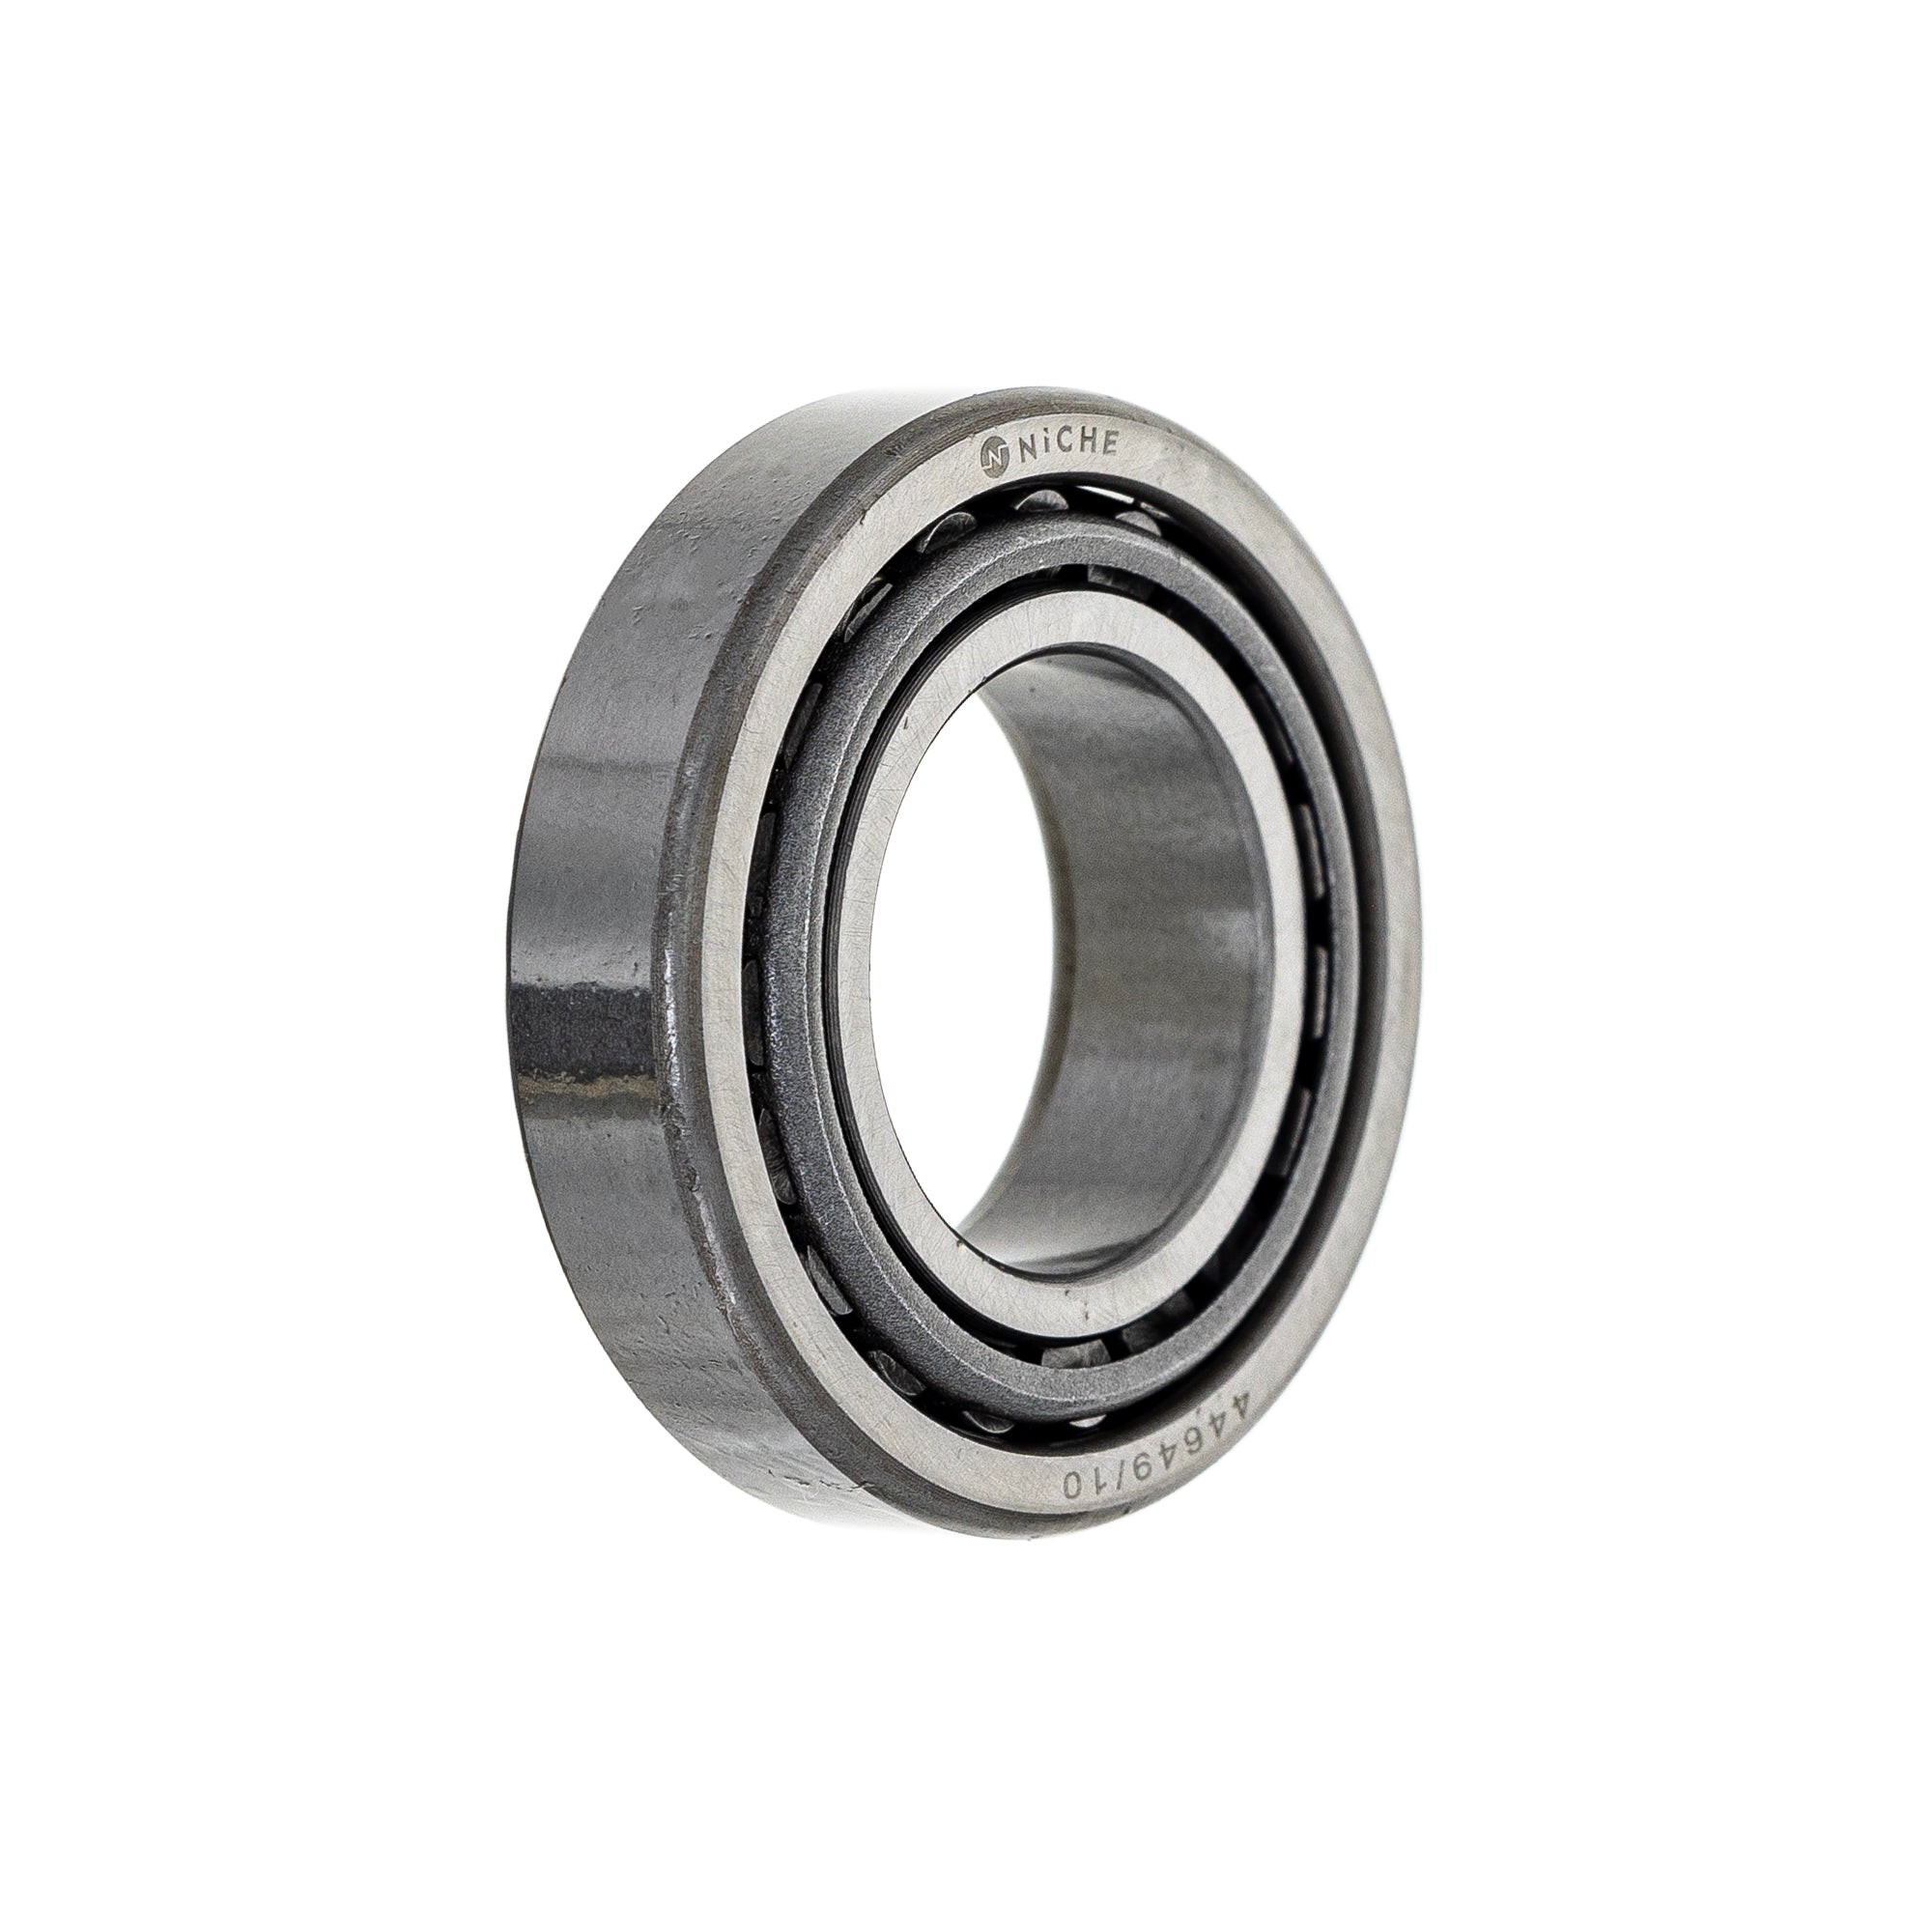 Tapered Roller Bearing for zOTHER Xpress Xplorer Xpedition Worker NICHE 519-CBB2268R